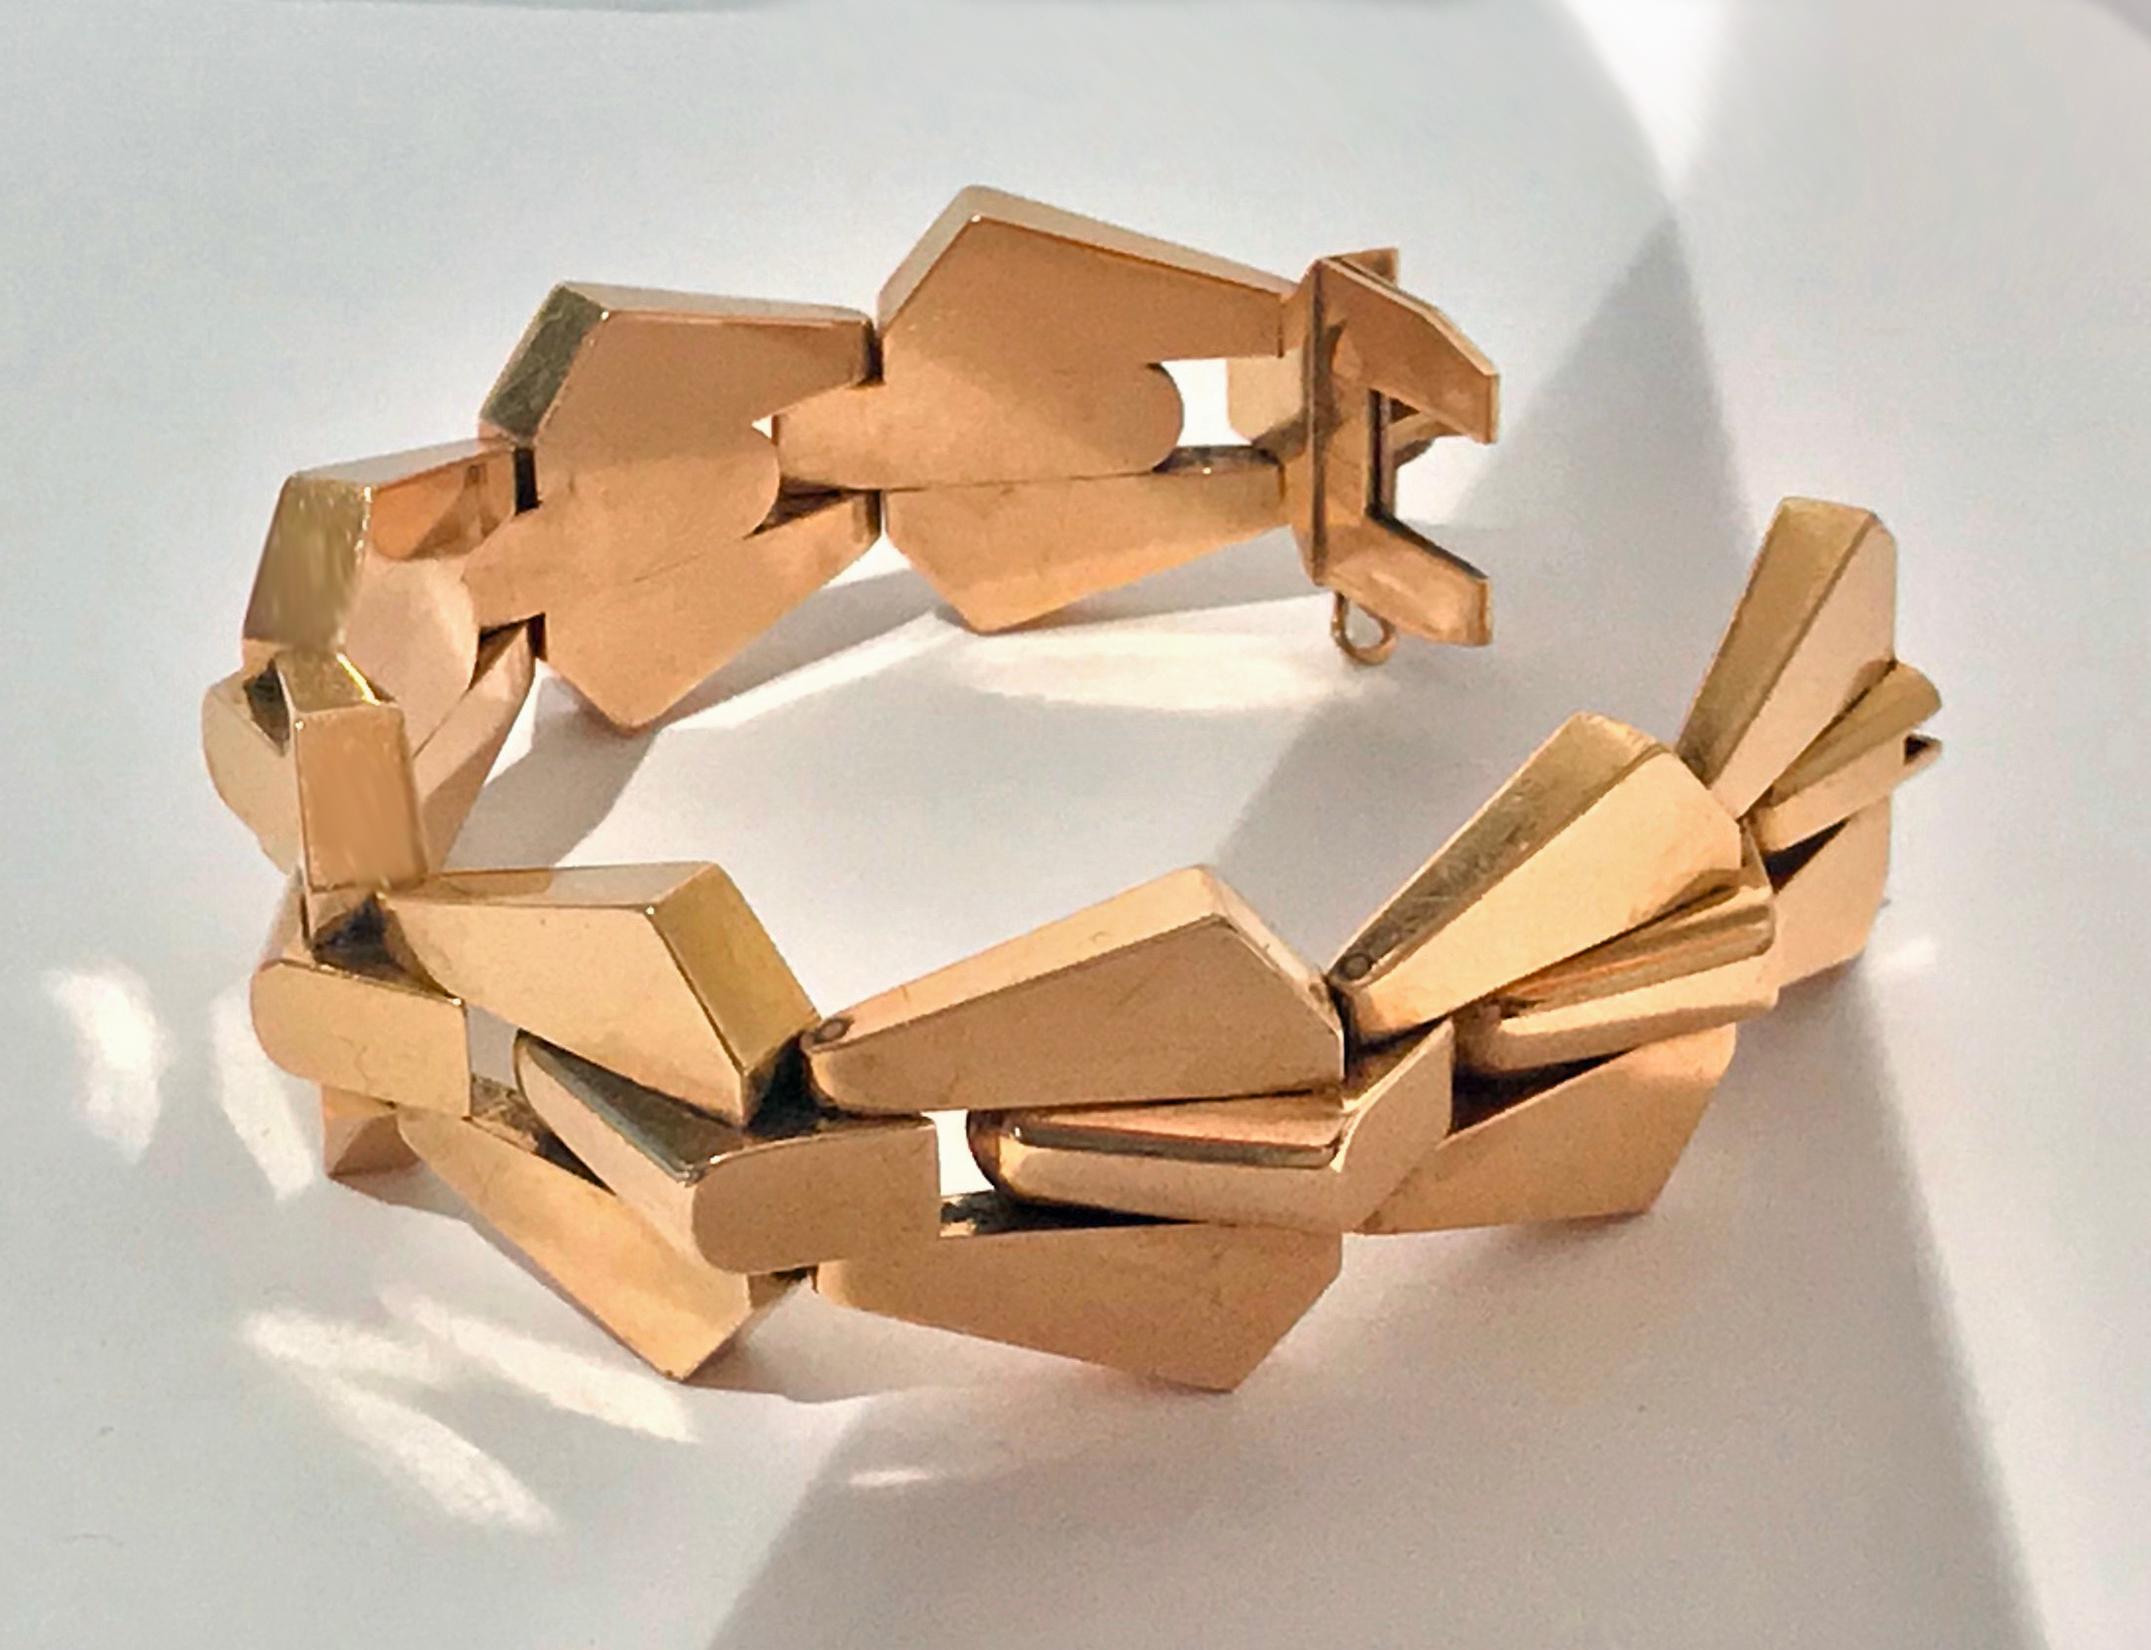 French 1940’s 18K pink Gold Bracelet. The large bracelet with fleche arrow like large hinged links. Width of links: 1.00 inches. Length: 7.50 inches. Full French eagle and makers mark LT in lozenge with fleche vertical between. Total Item Weight: